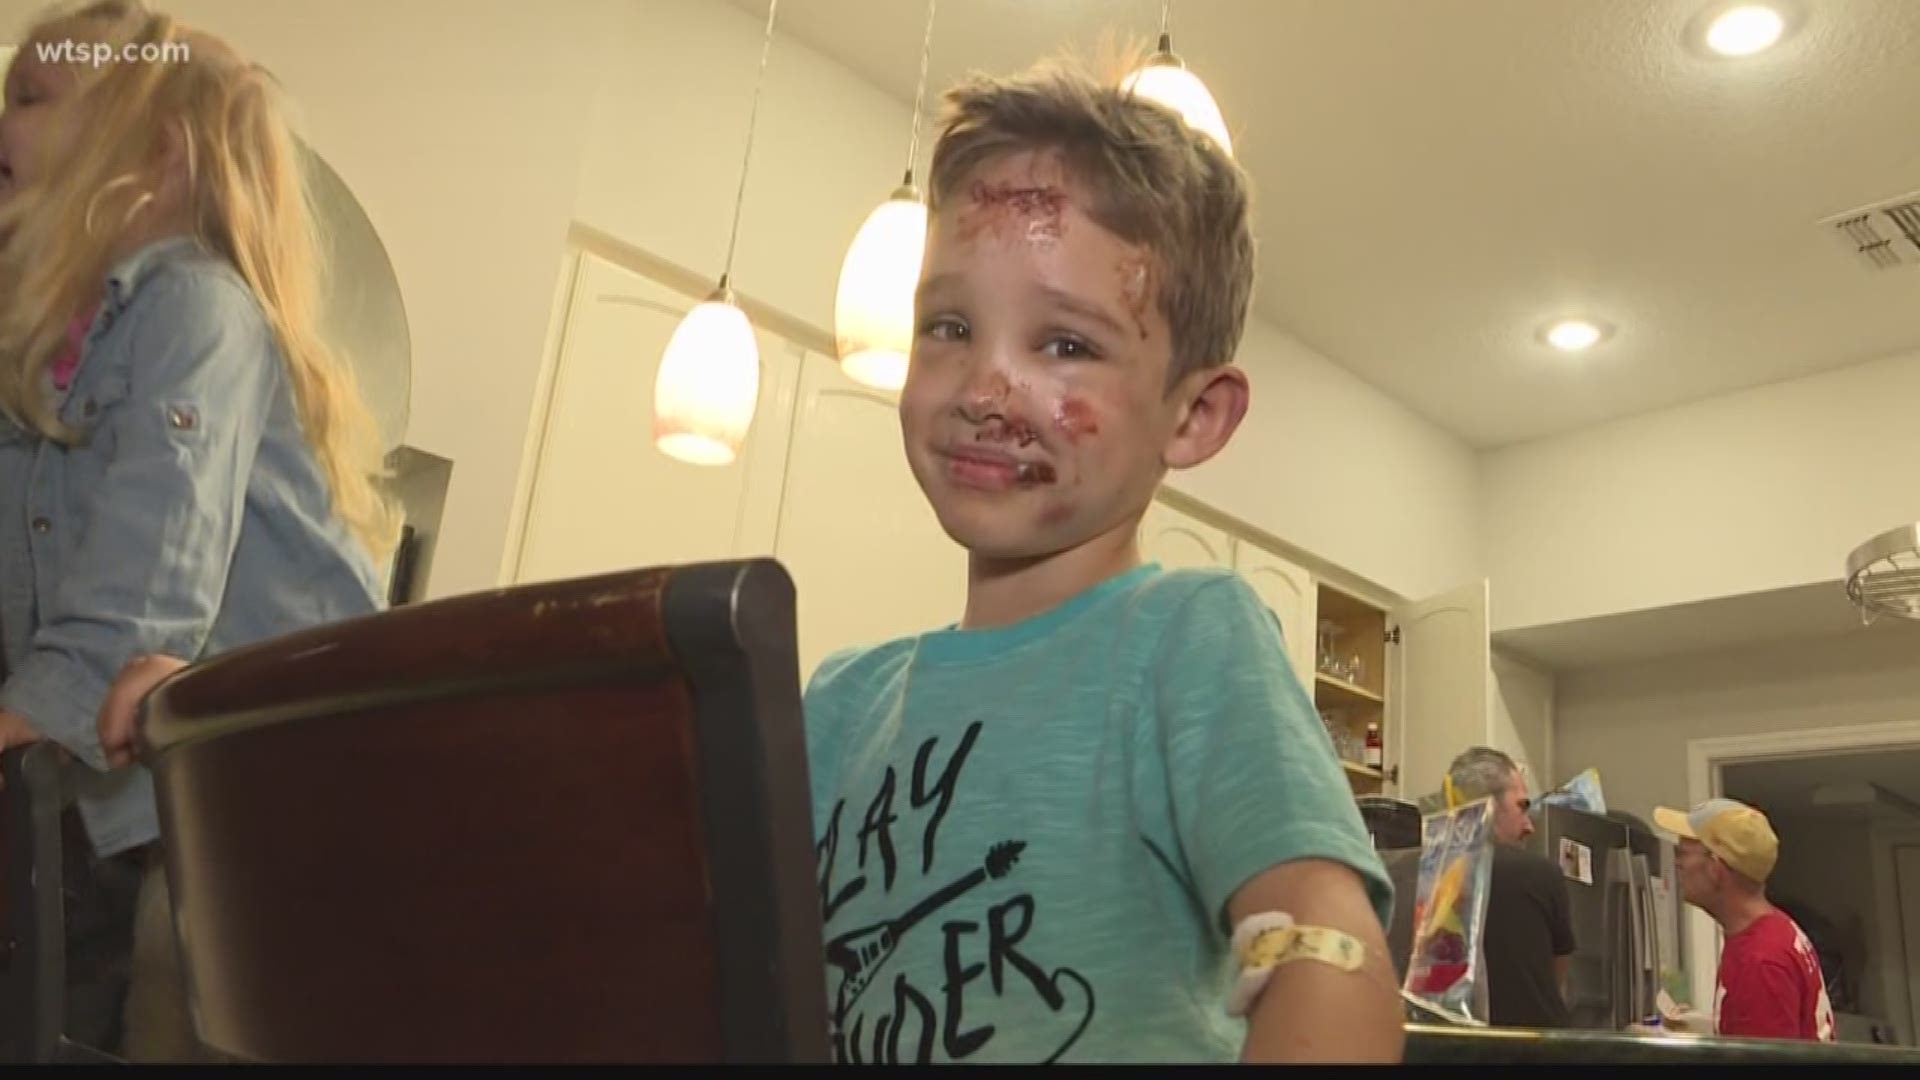 Dominick Keyes has a few bruises and stitches, but doctors said it will all heal with time.